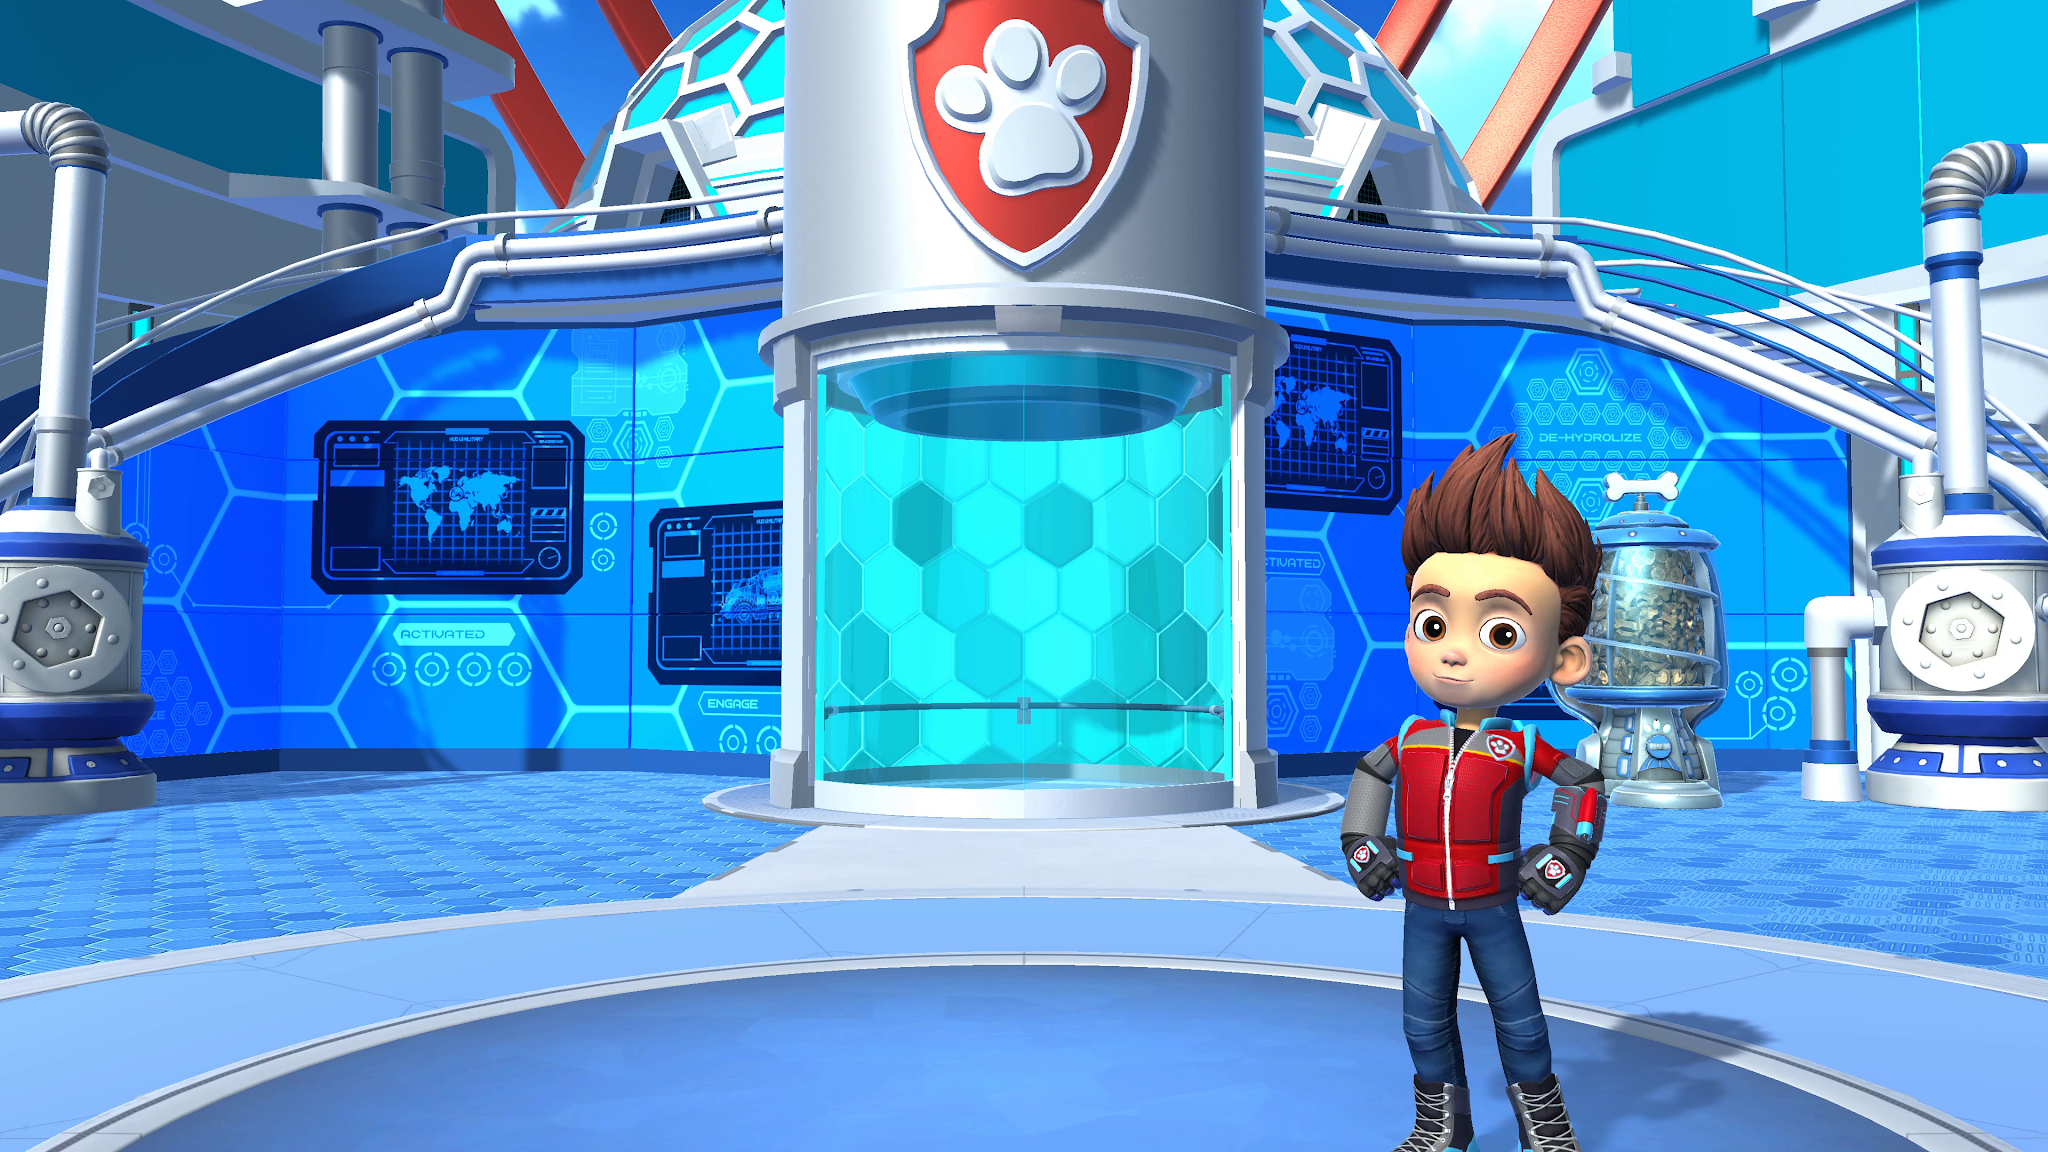 NickALive!: 'PAW Patrol World' Leaps Onto Consoles and PC